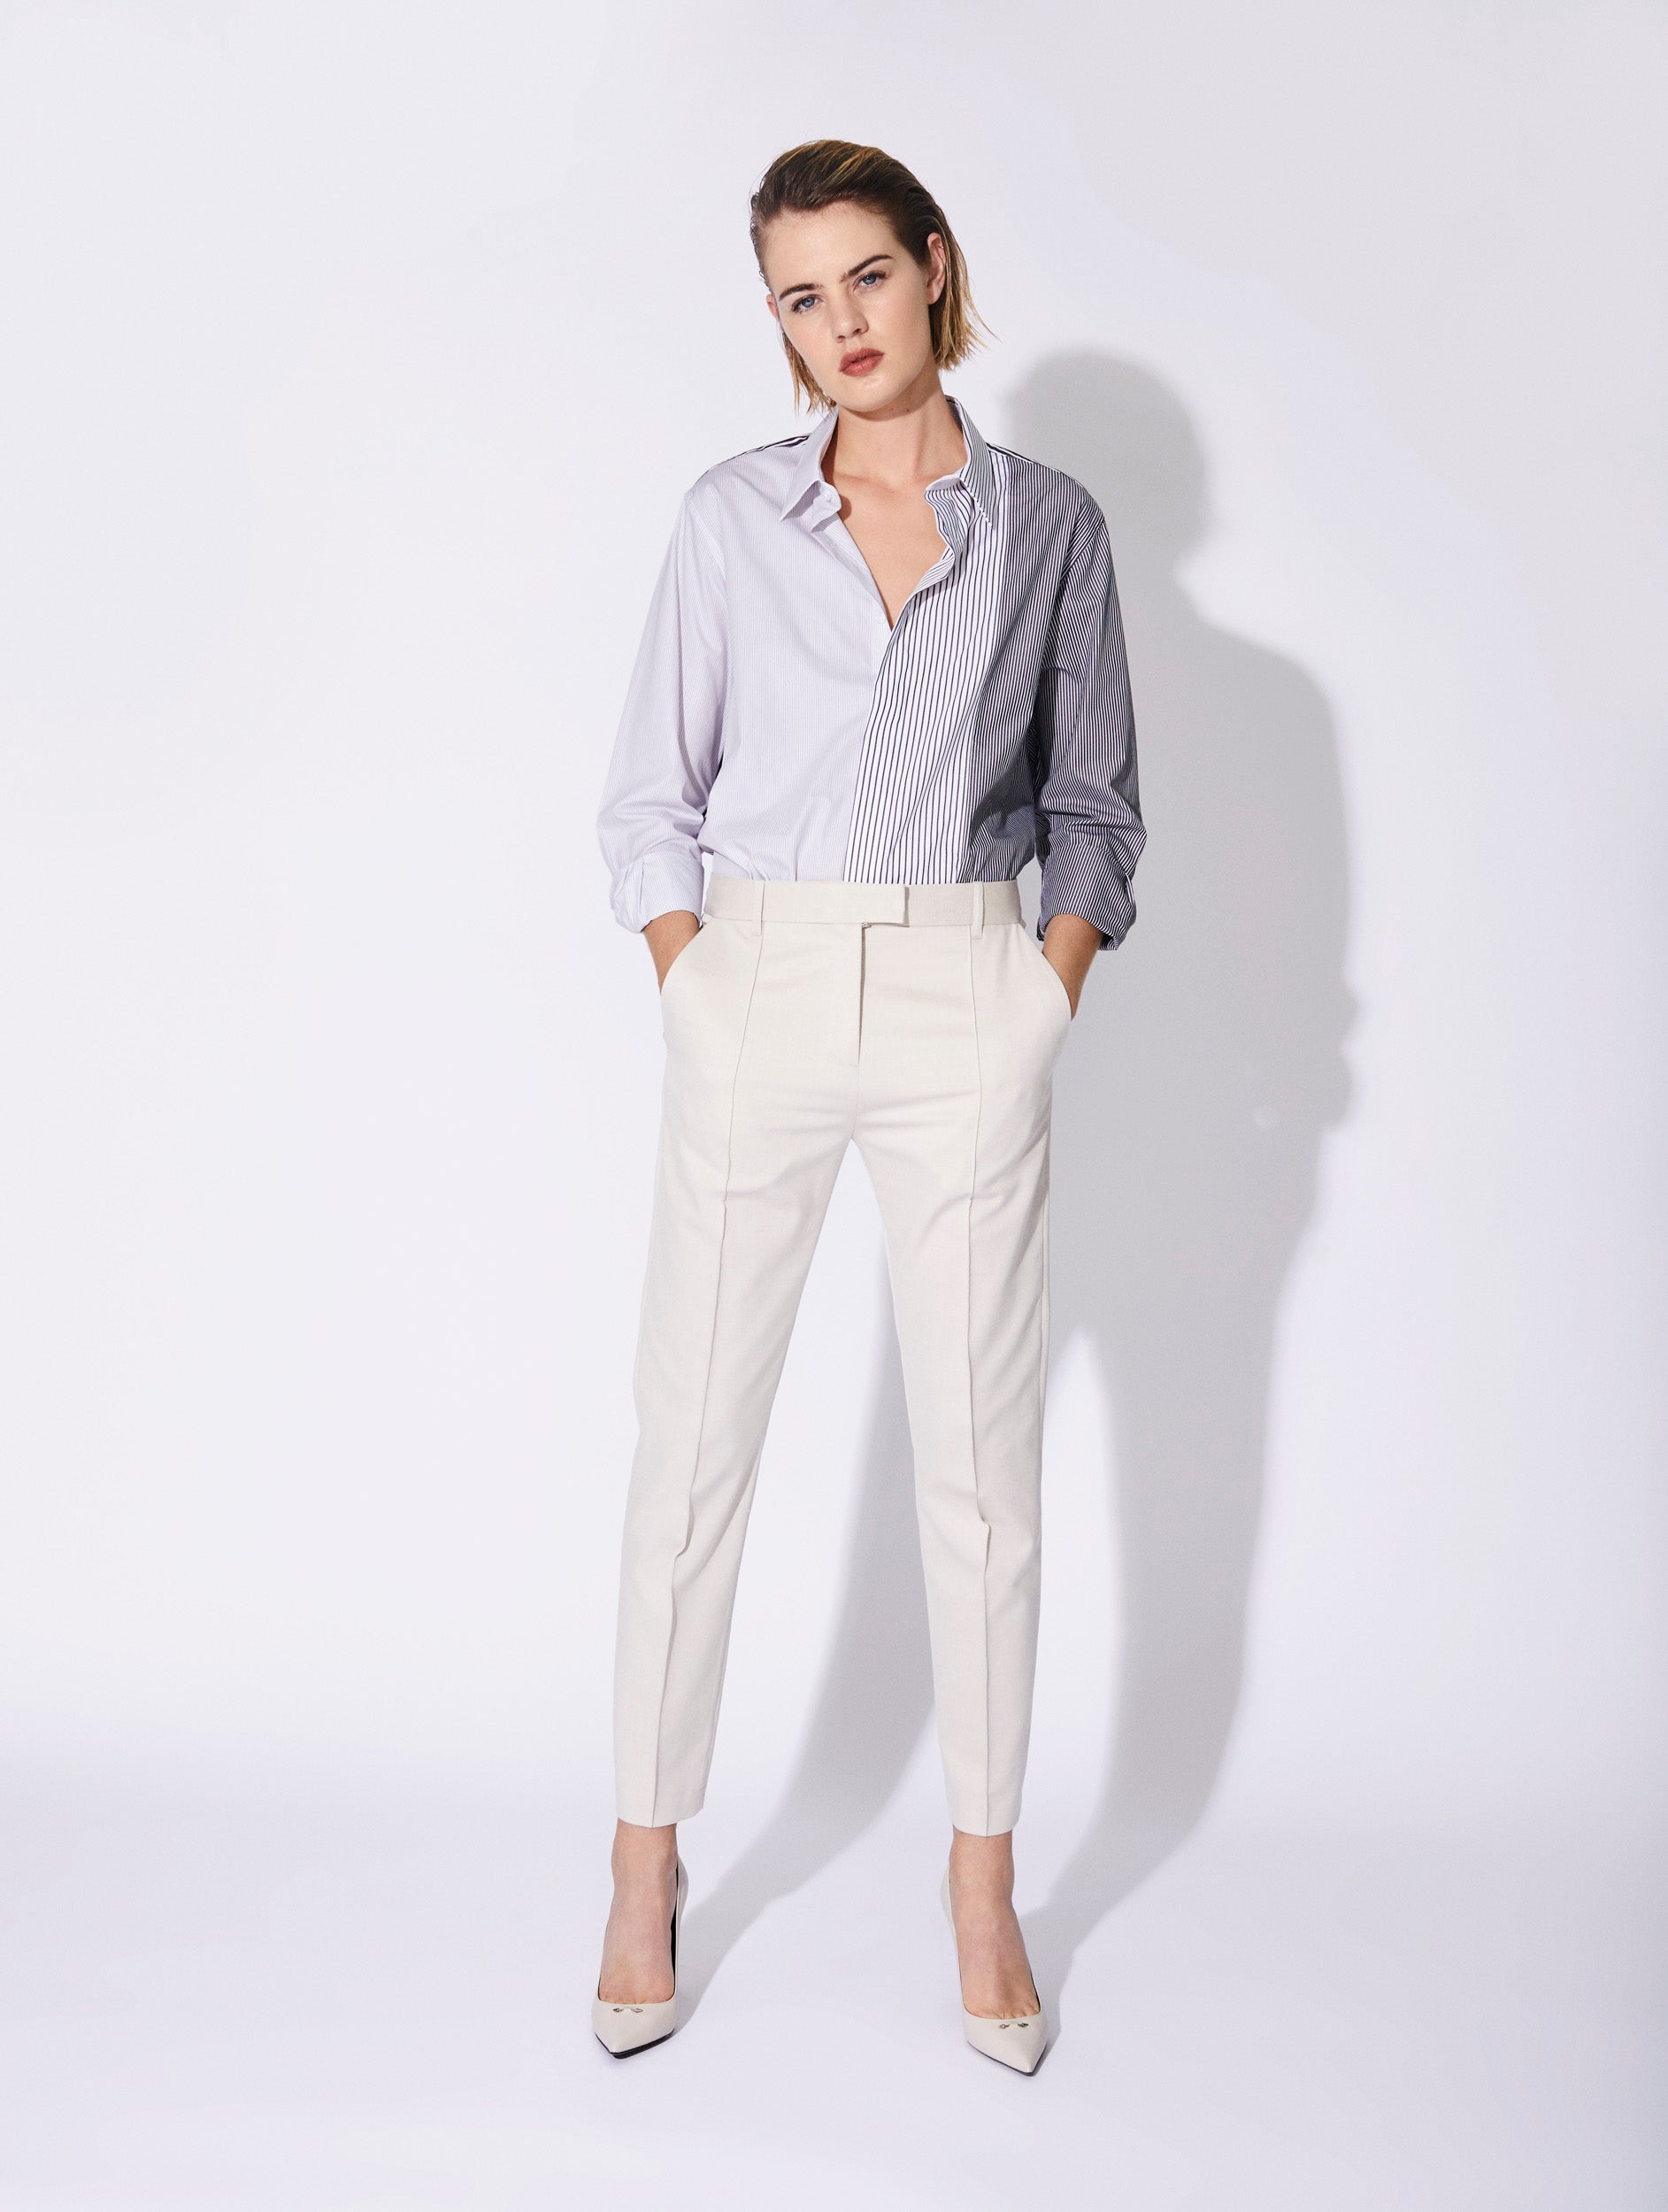 stylish womens trouser casual cotton pant formal bottom wear